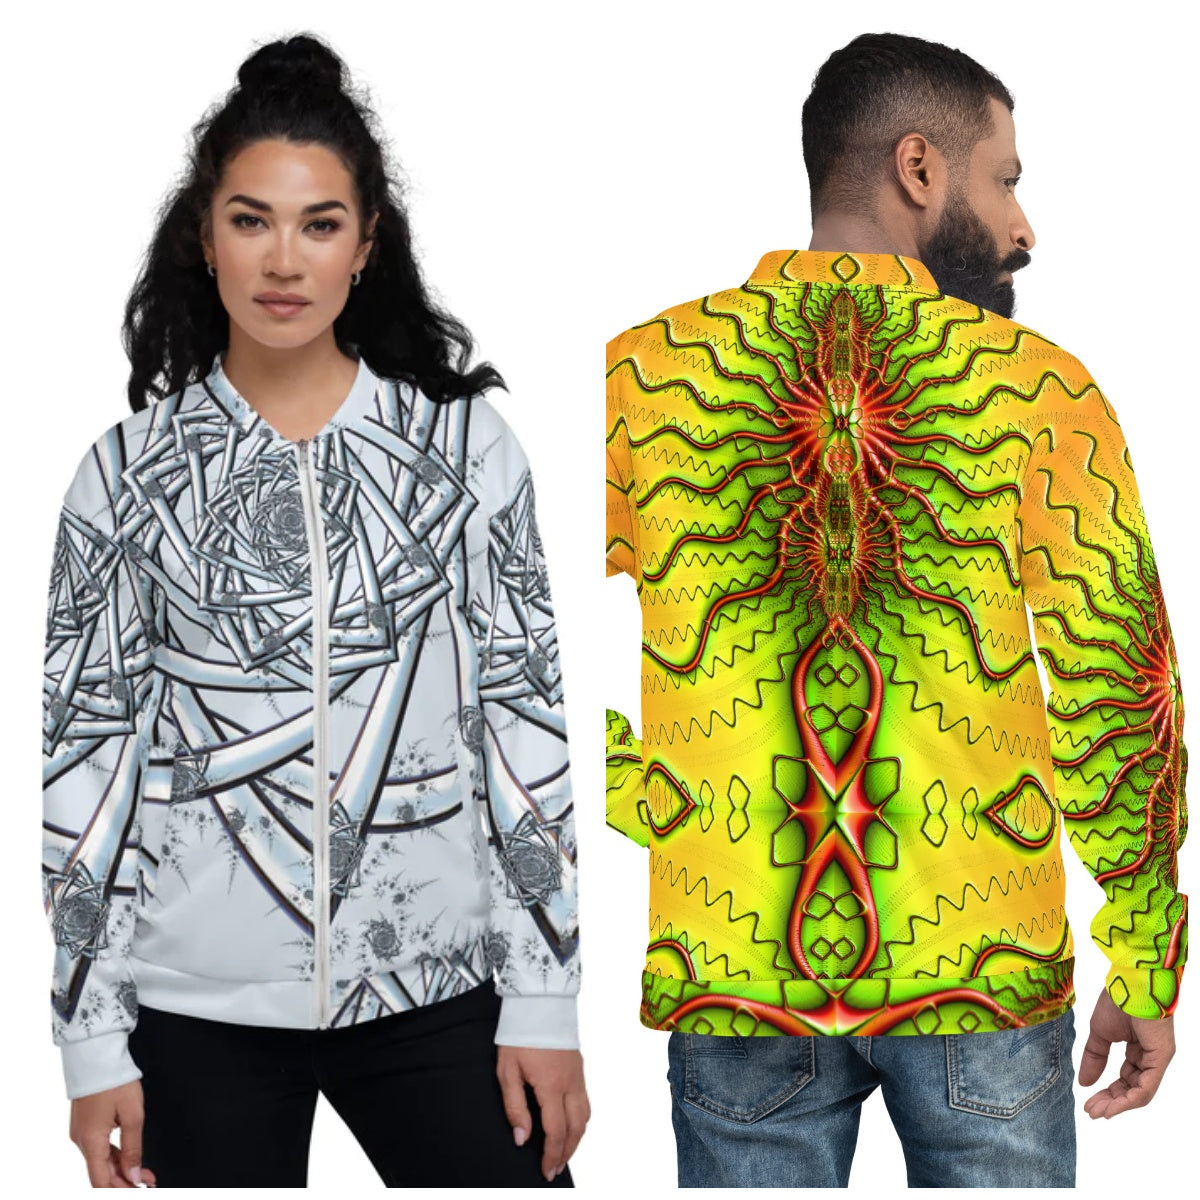 Unique Bomber Jackets with Print All Over by ZKoriginal